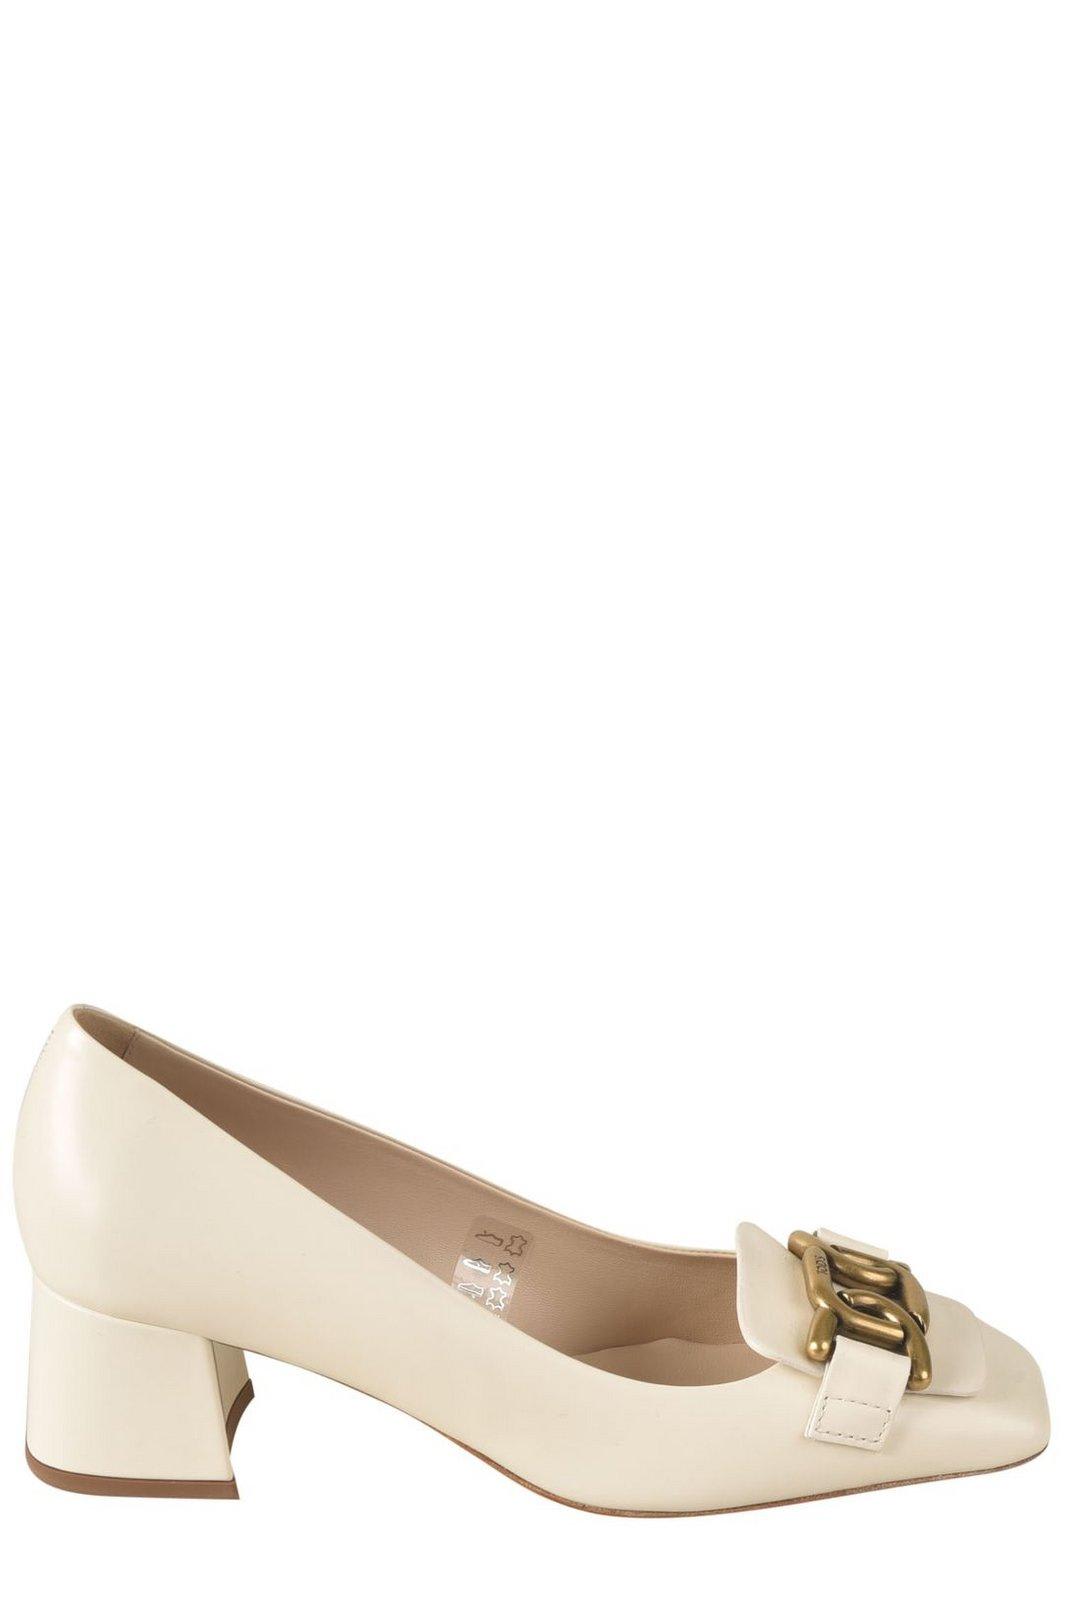 TOD'S KATE PUMPS